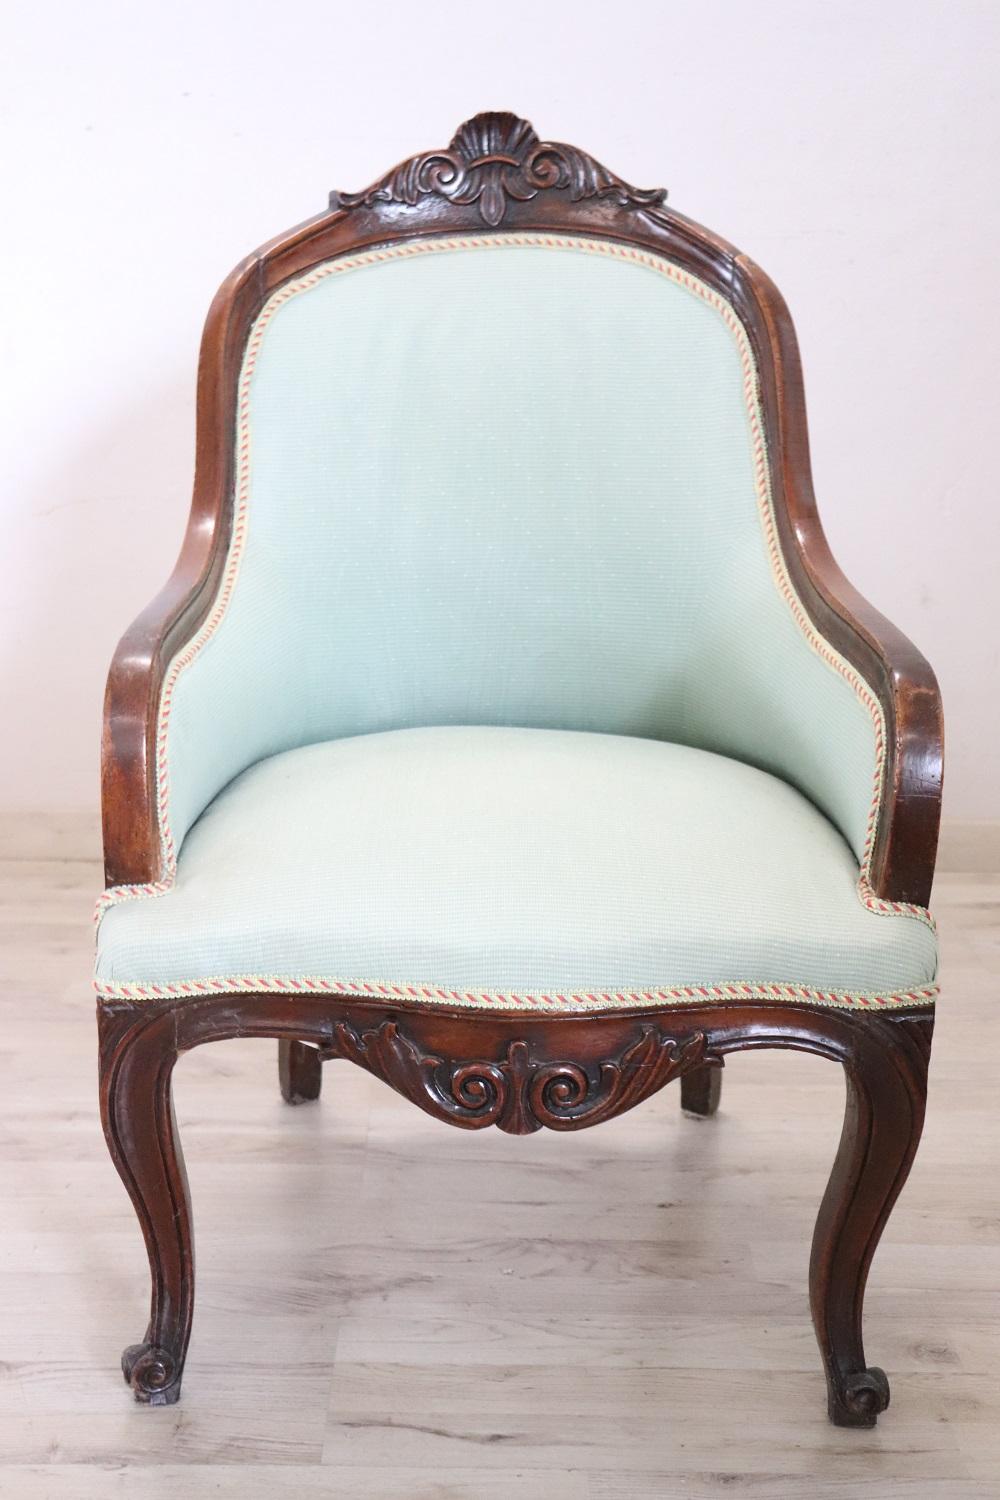 Delightful small antique Italian armchair from the mid-19th century Louis Philippe period. Made of solid walnut wood with refined wood-carved decoration. Small size very comfortable and enveloping with padded backrest. These small armchairs were